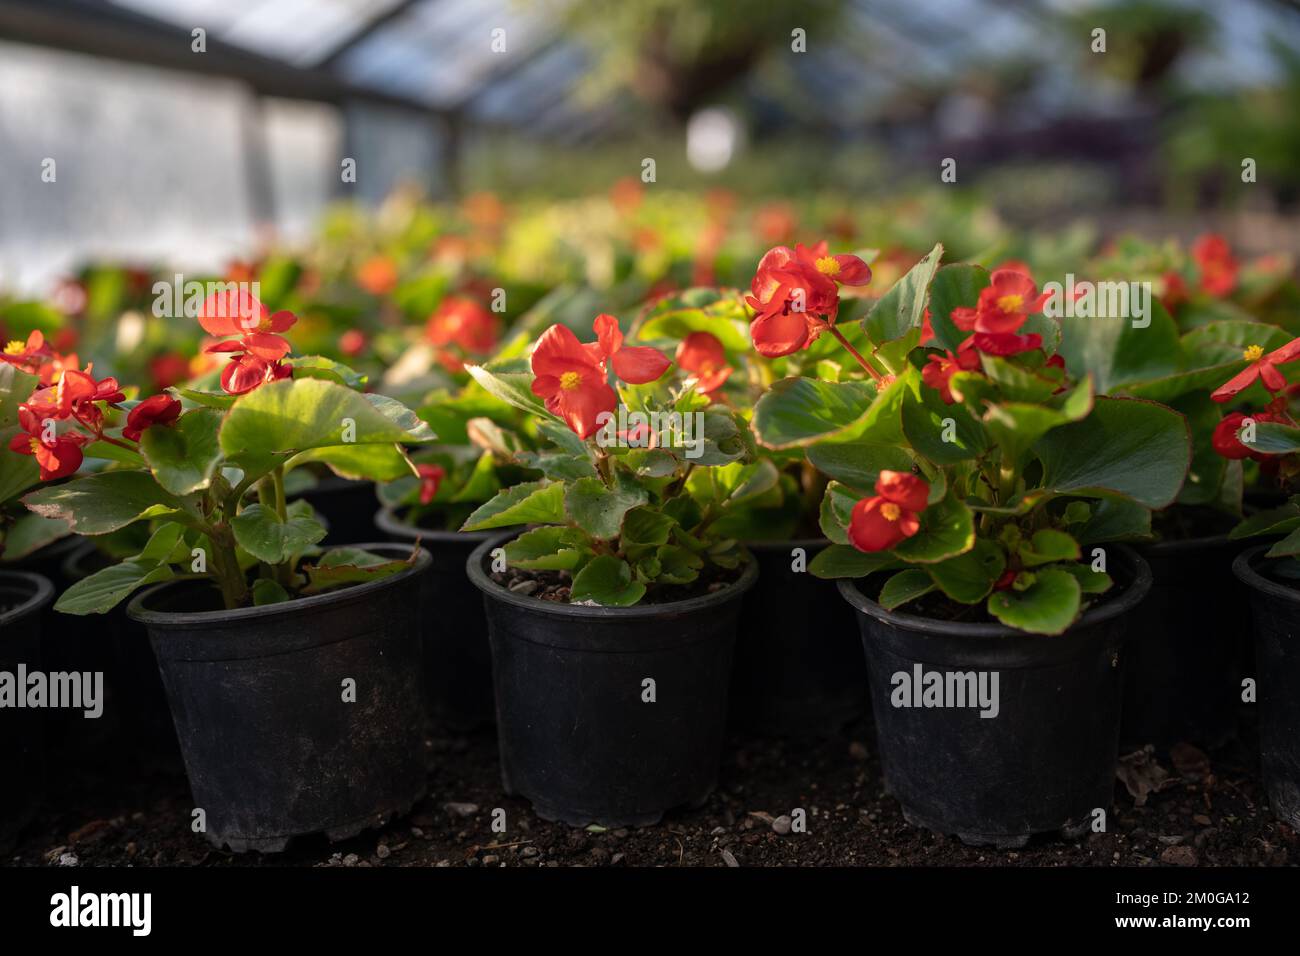 Green flowering begonia plants in dark pots with soil indoors in nurseries with glass roof and walls Stock Photo